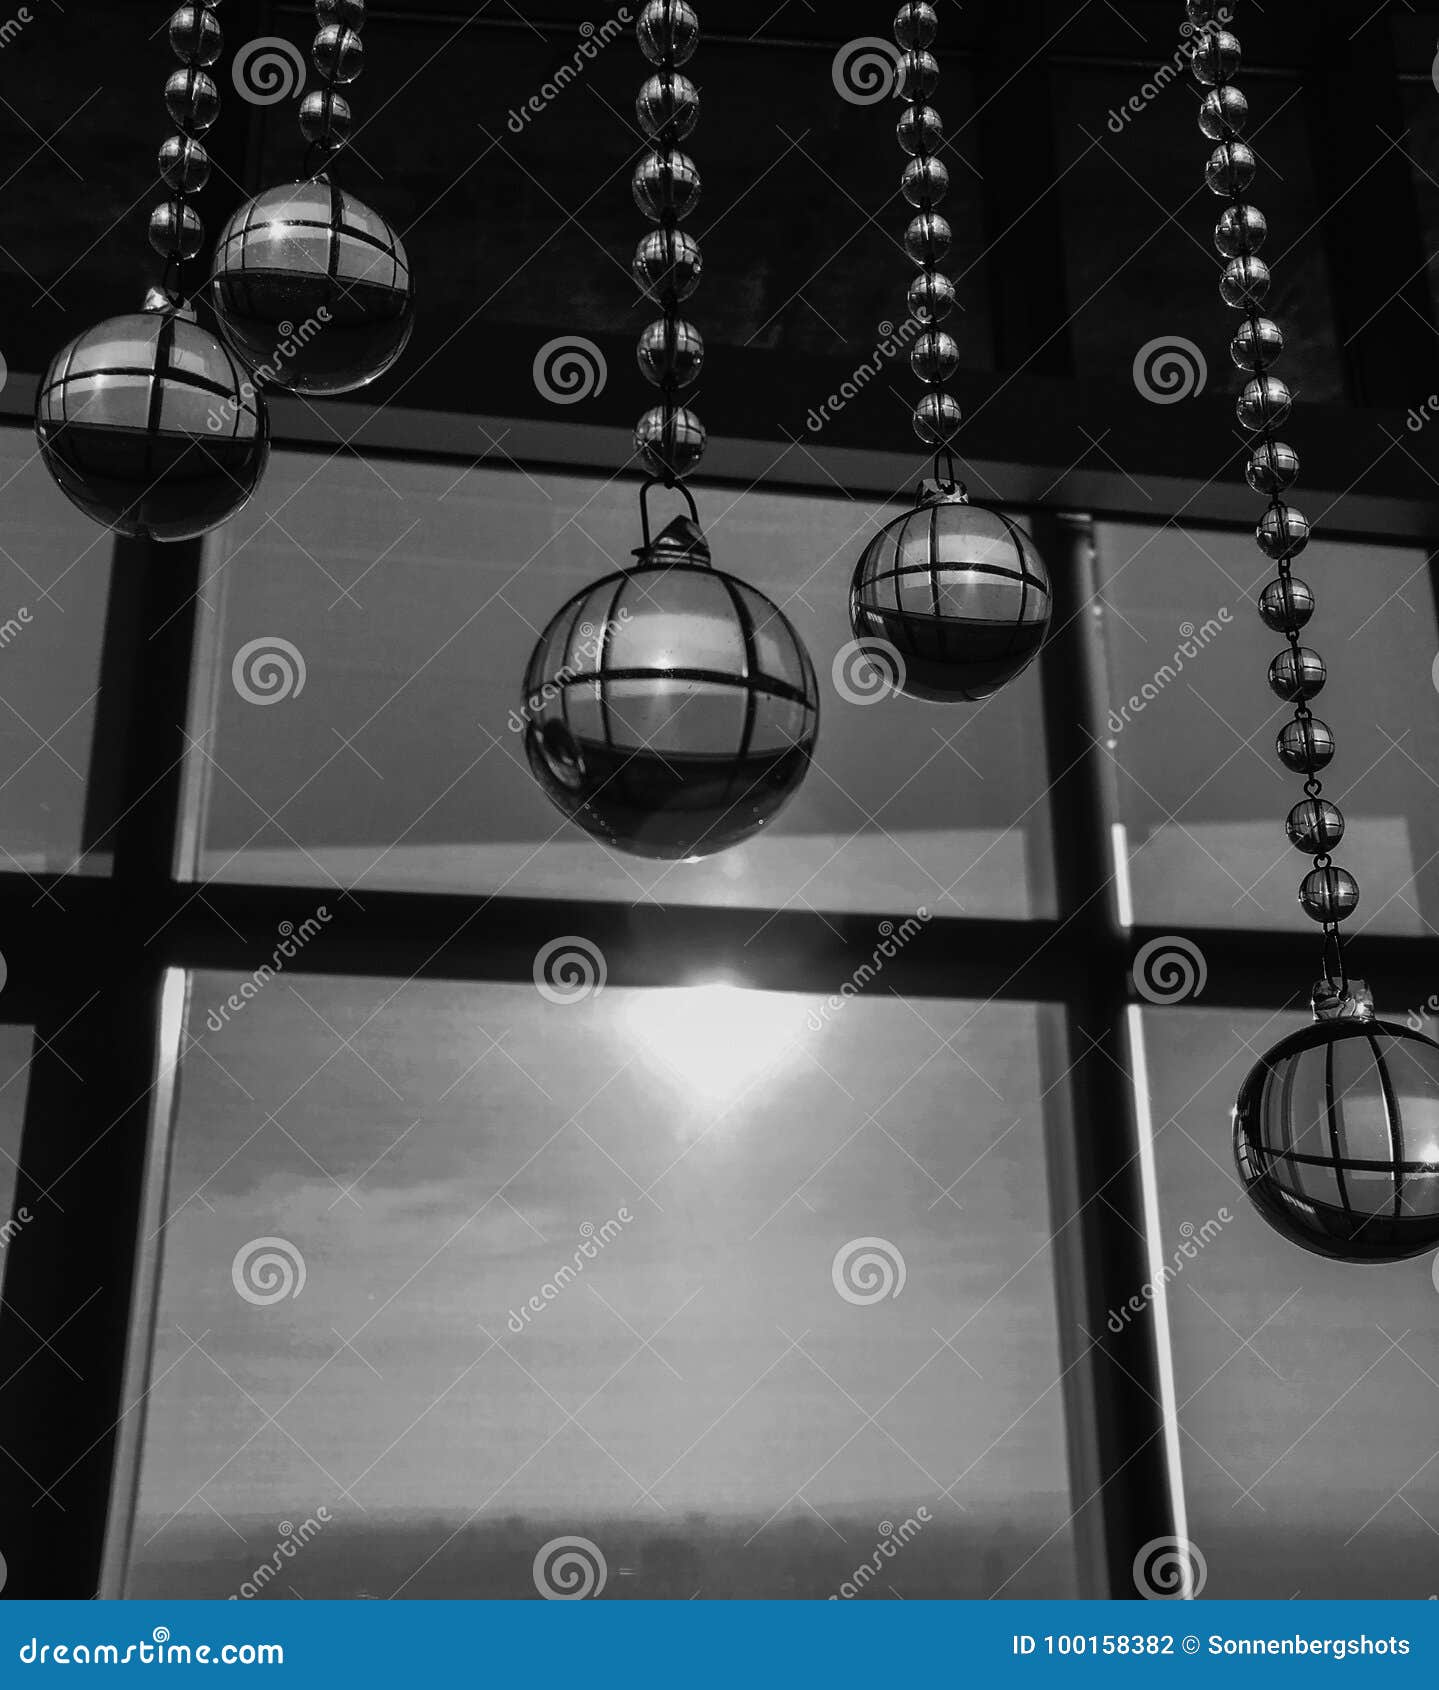 Black And White Of Crystal Balls Hanging From Ceiling In